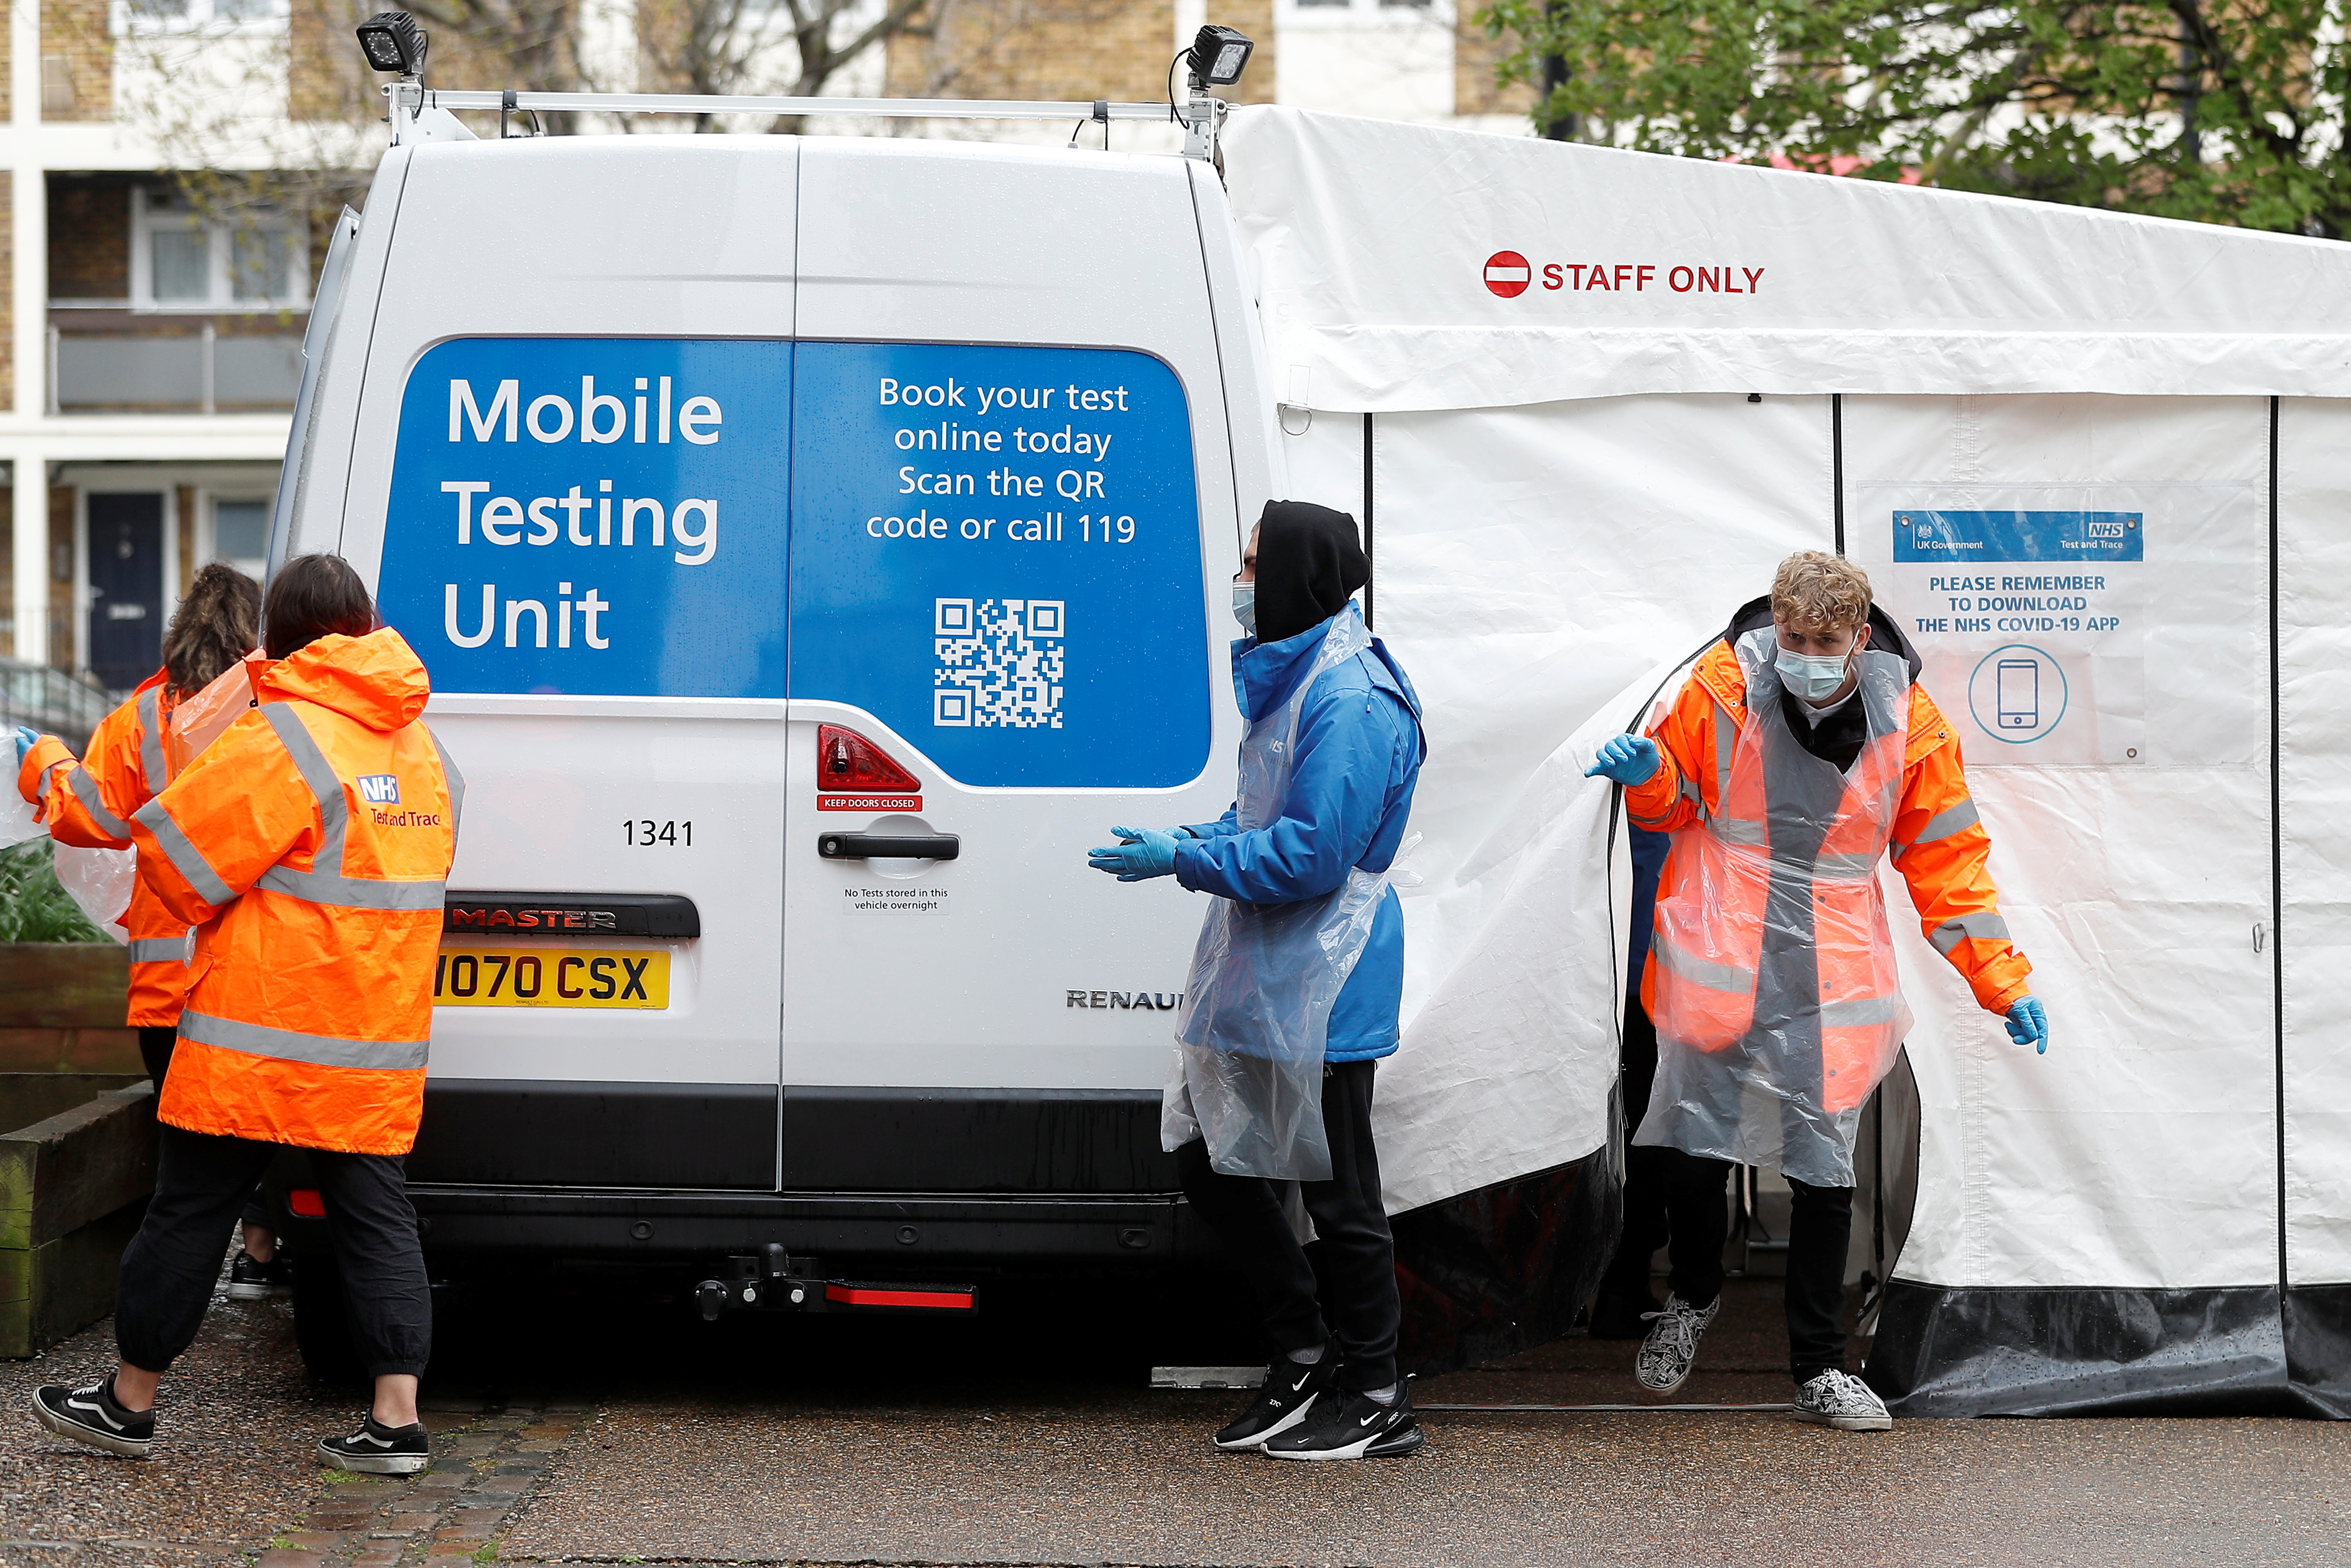 NHS workers are seen next to a coronavirus disease (COVID-19) mobile testing unit in Tower Hamlets, London